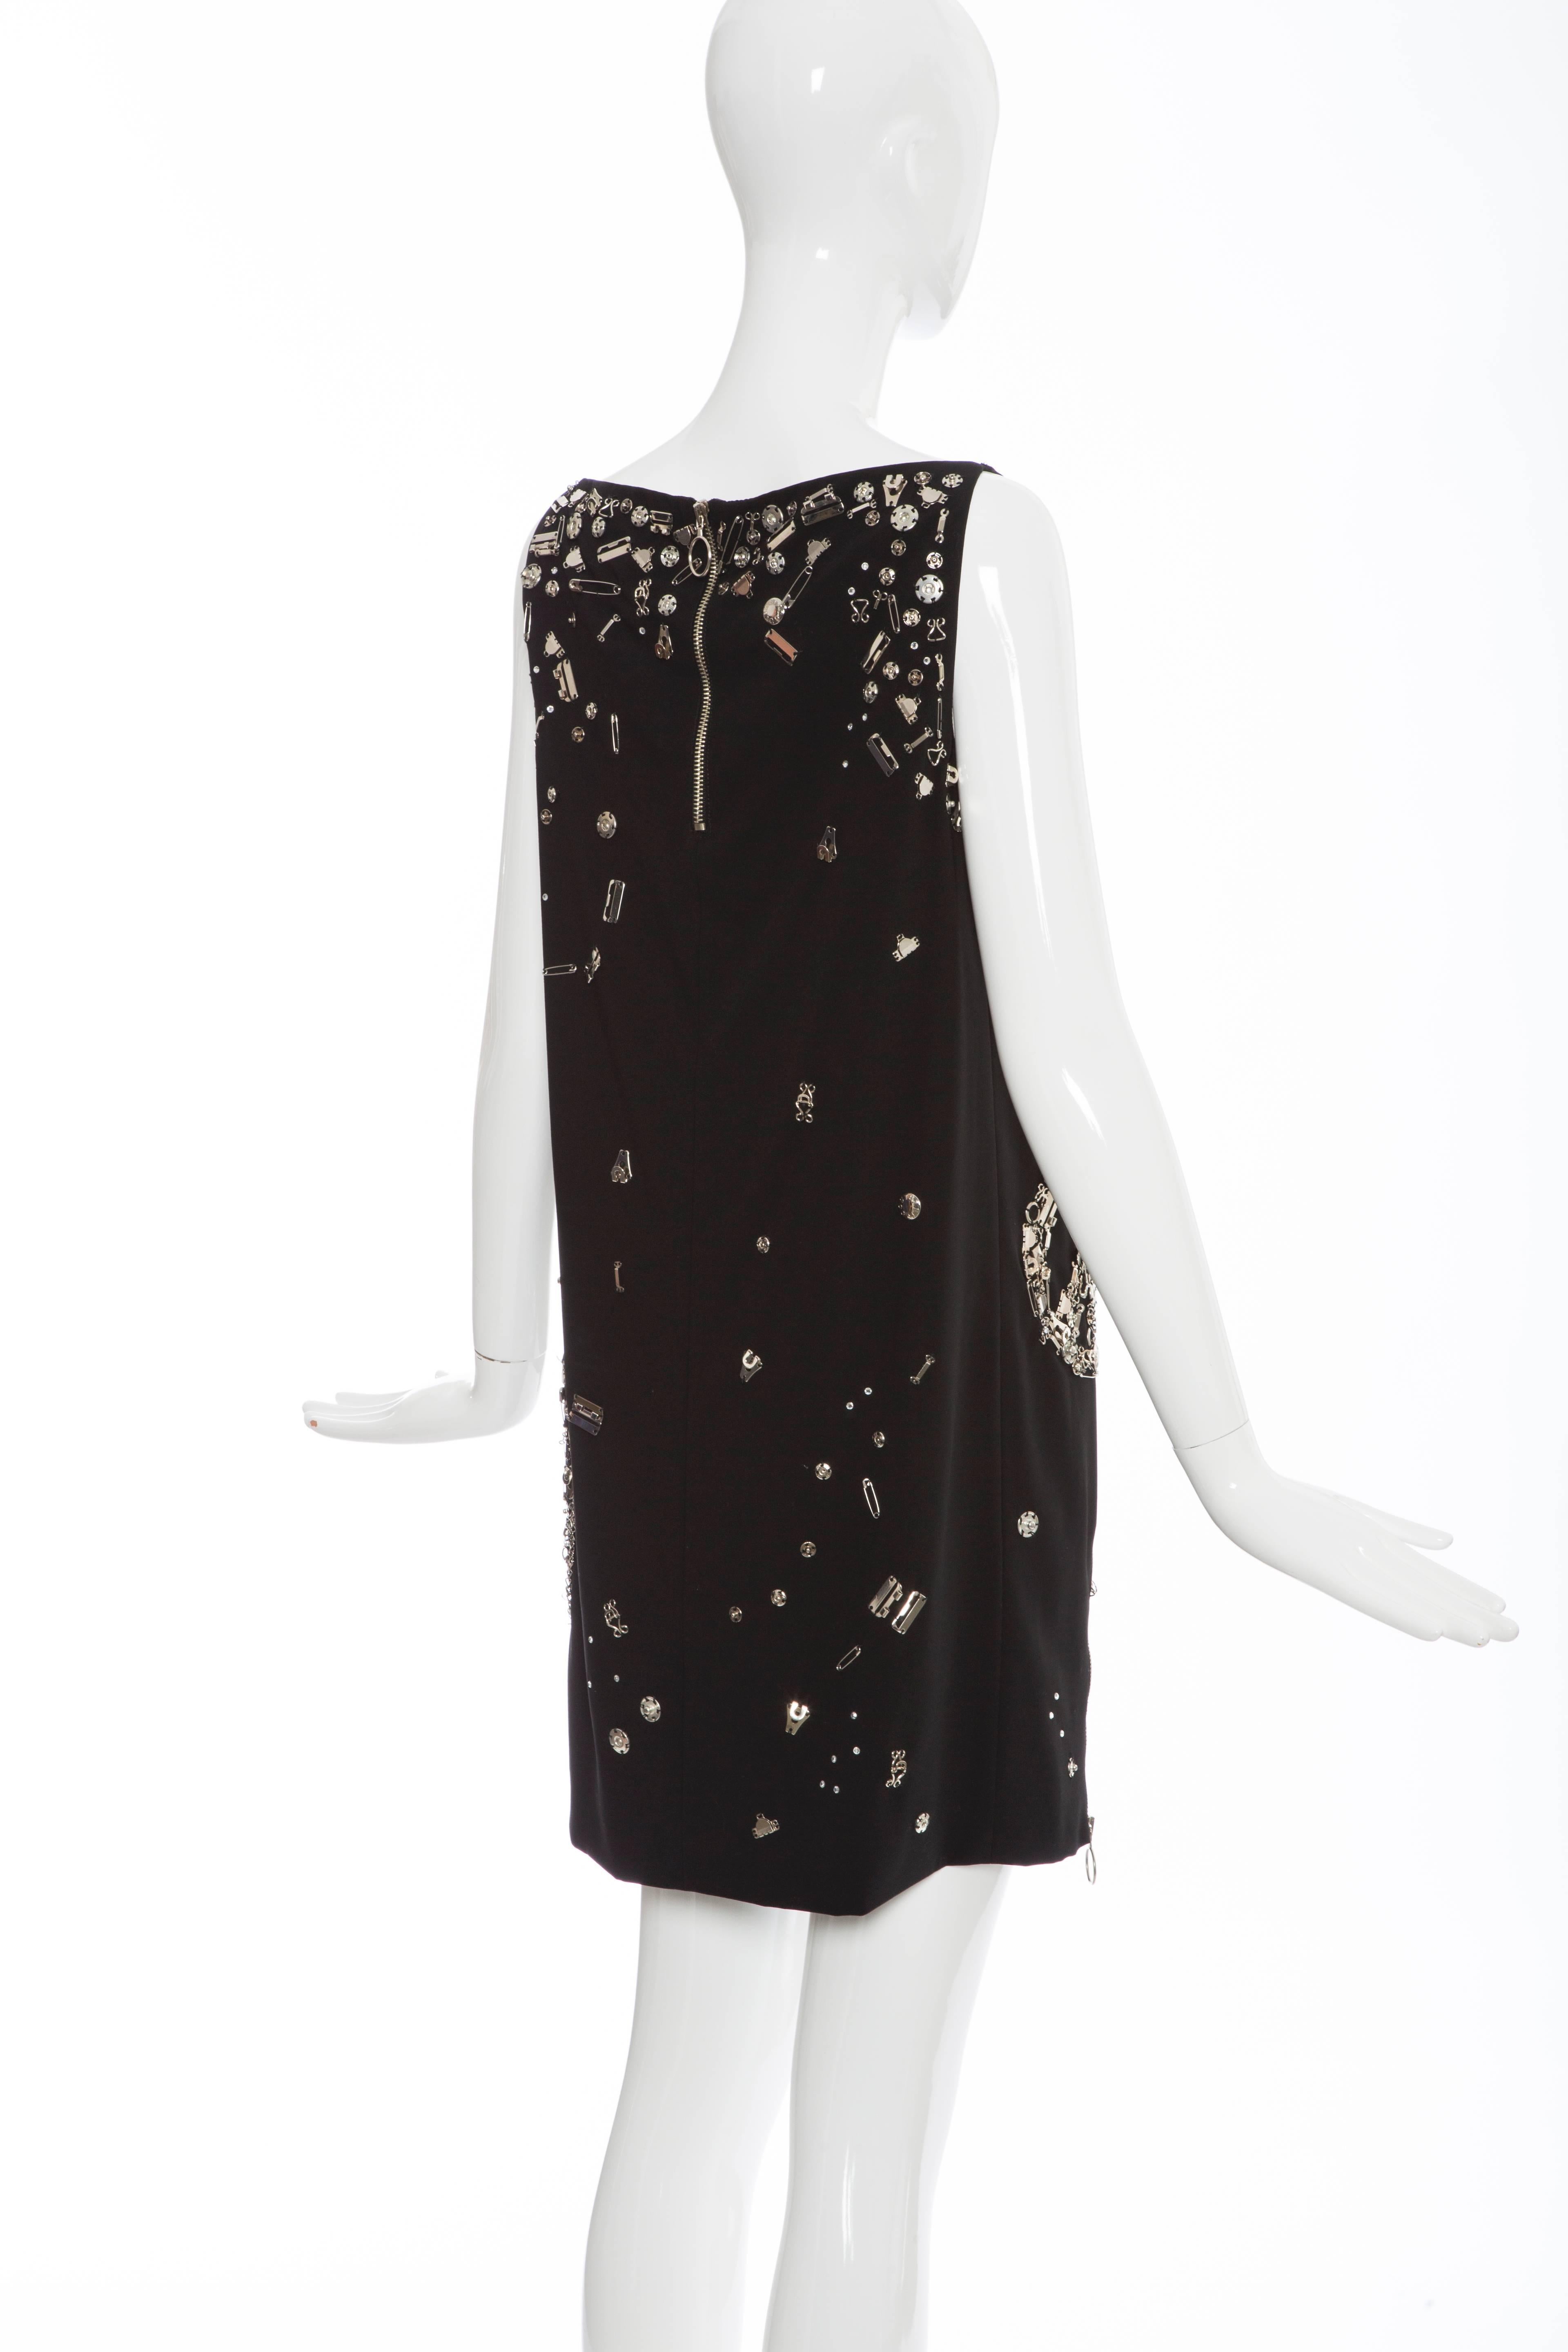 Moschino Couture Runway Black Sleeveless Safety Pin Embellished Dress, Fall 2009 3